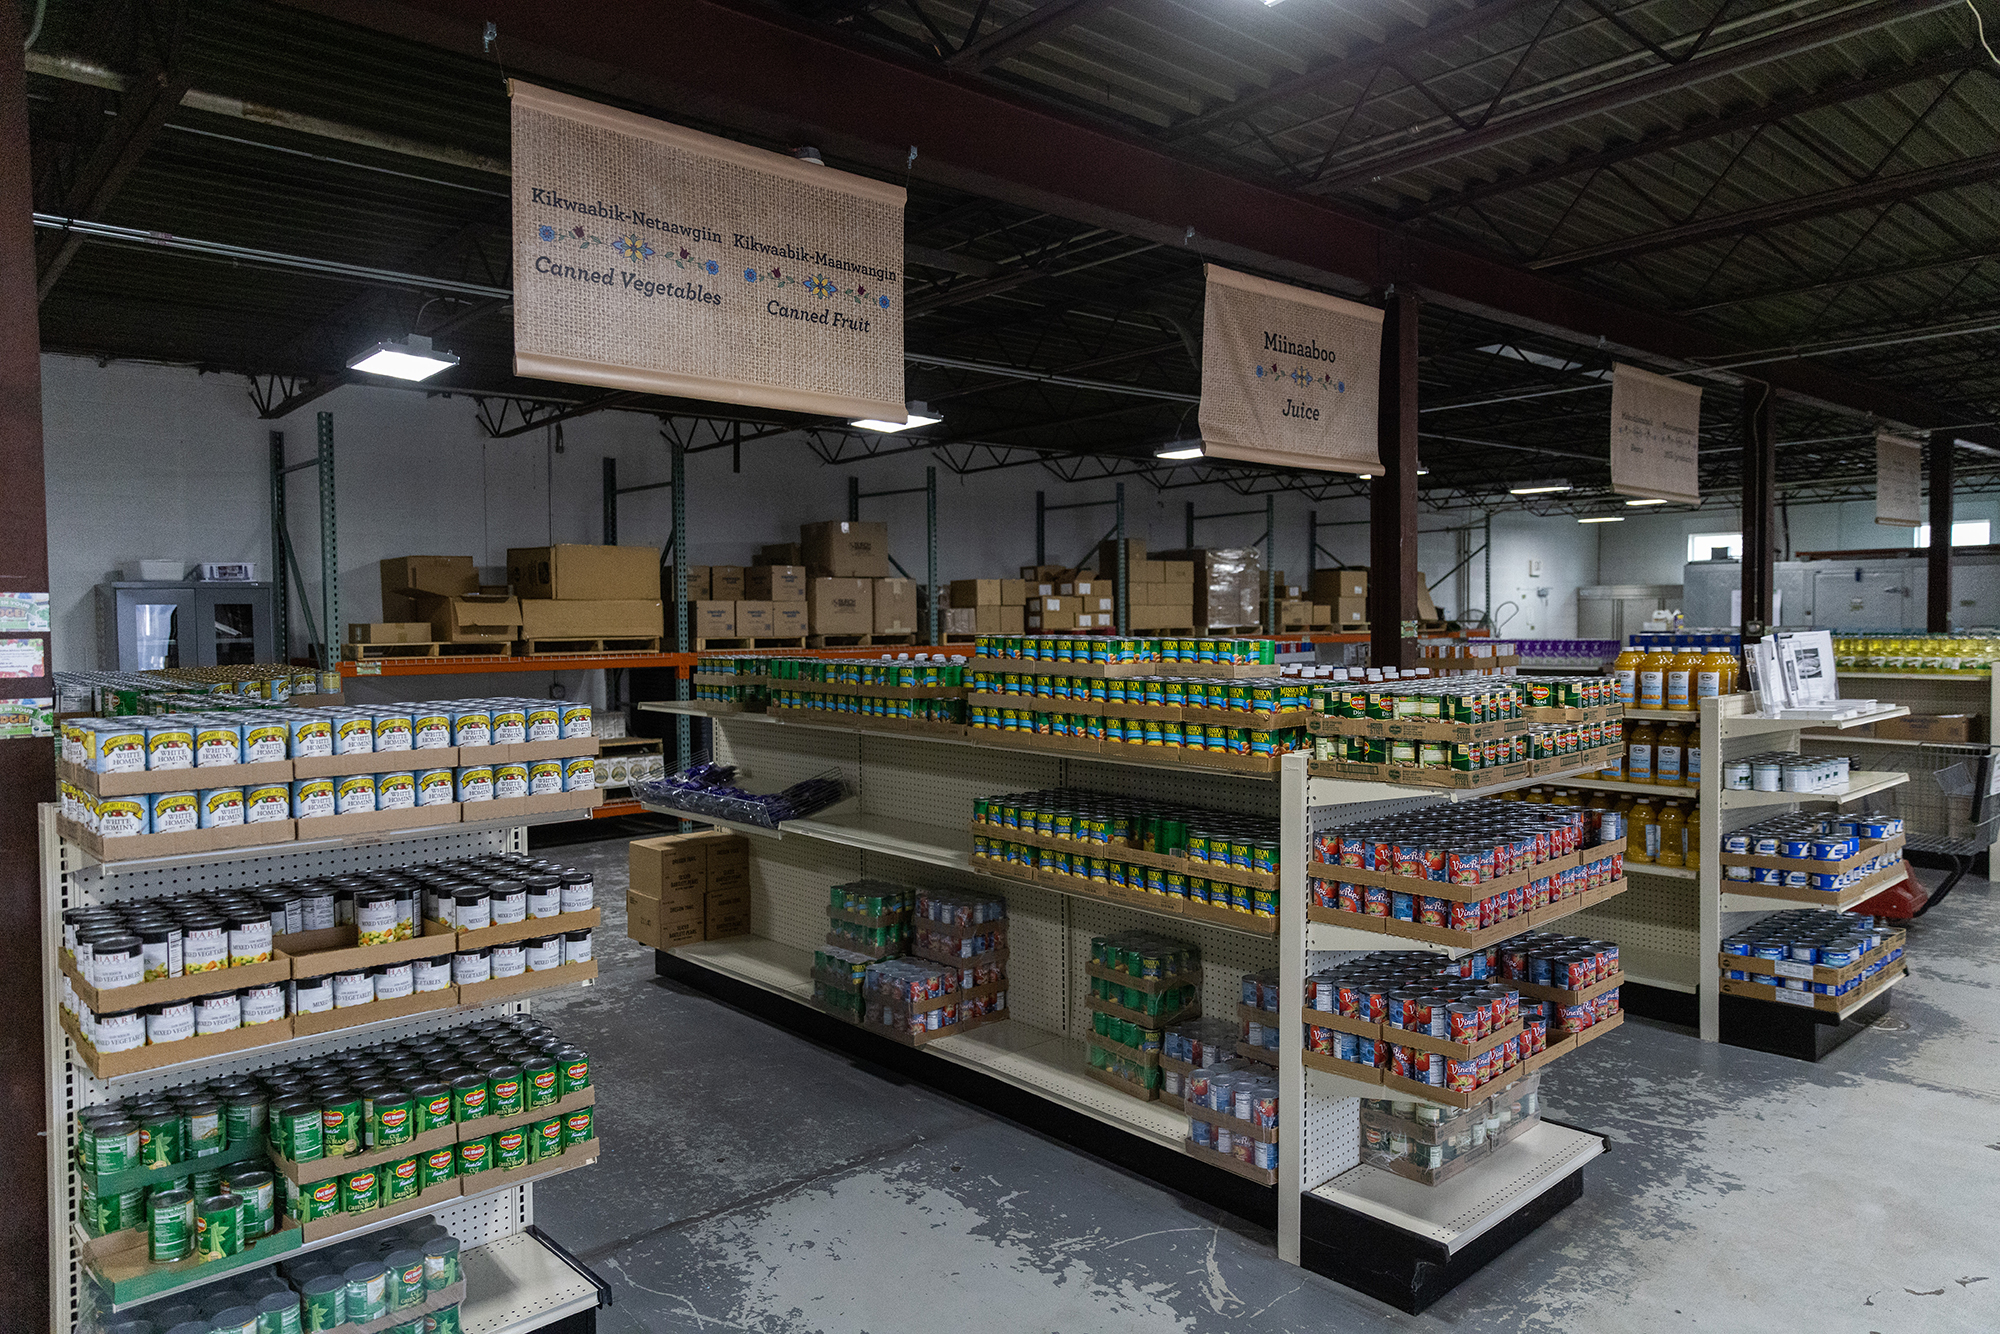 Rows of canned goods and aisle signs.